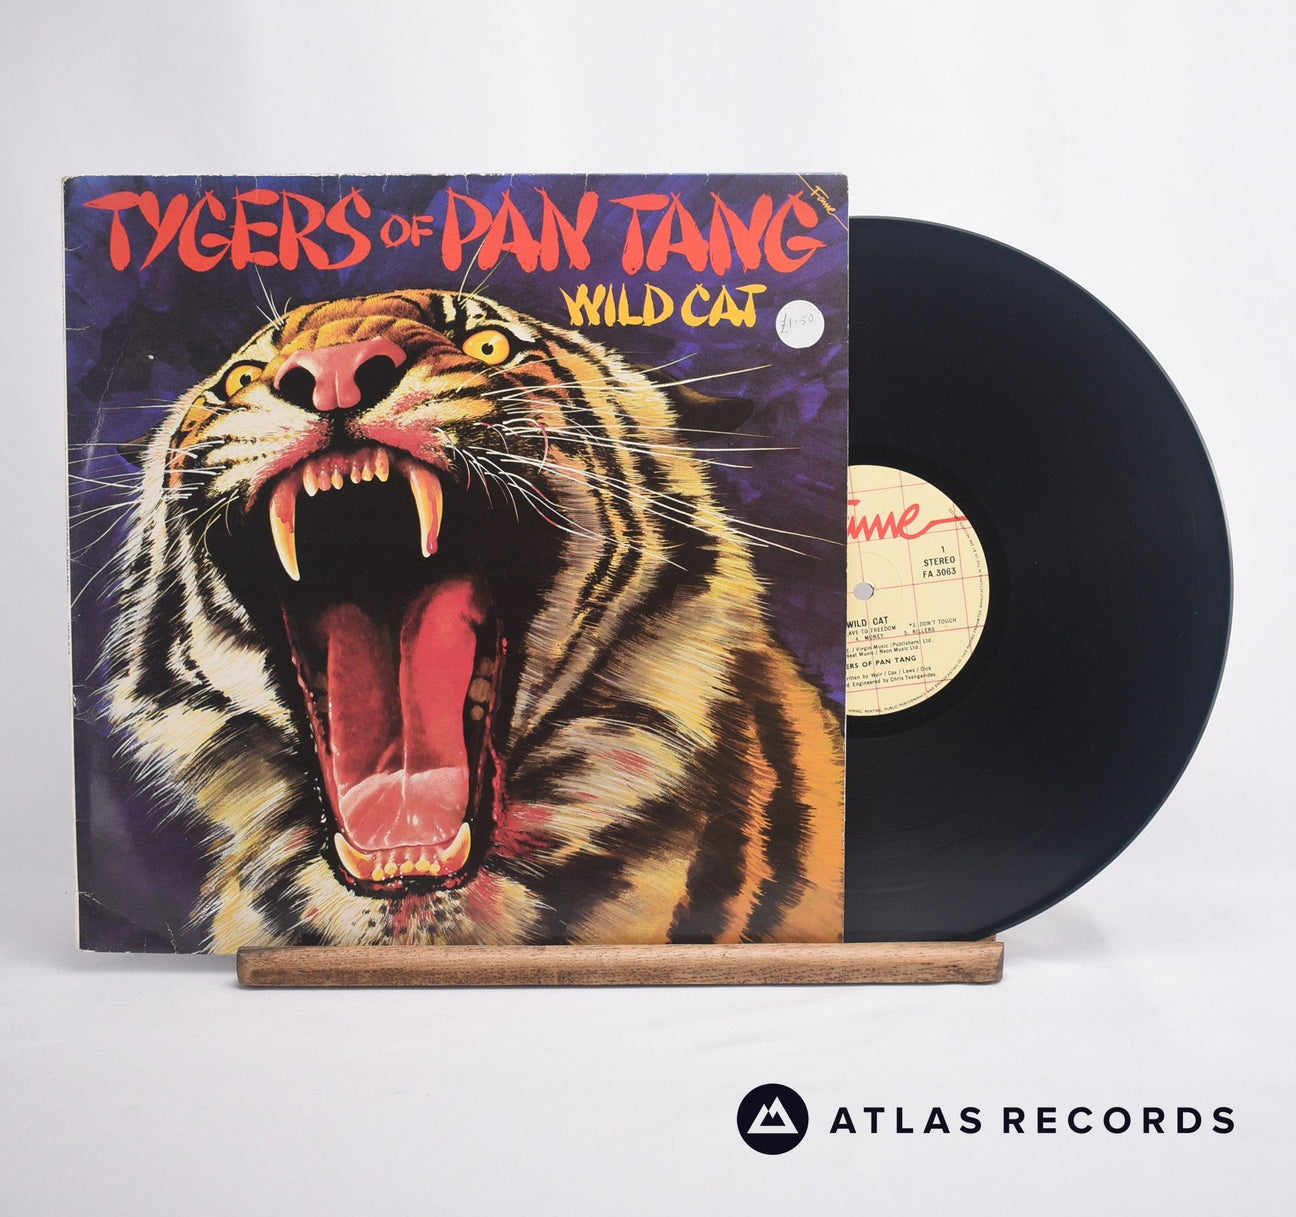 Tygers Of Pan Tang Wild Cat LP Vinyl Record - Front Cover & Record